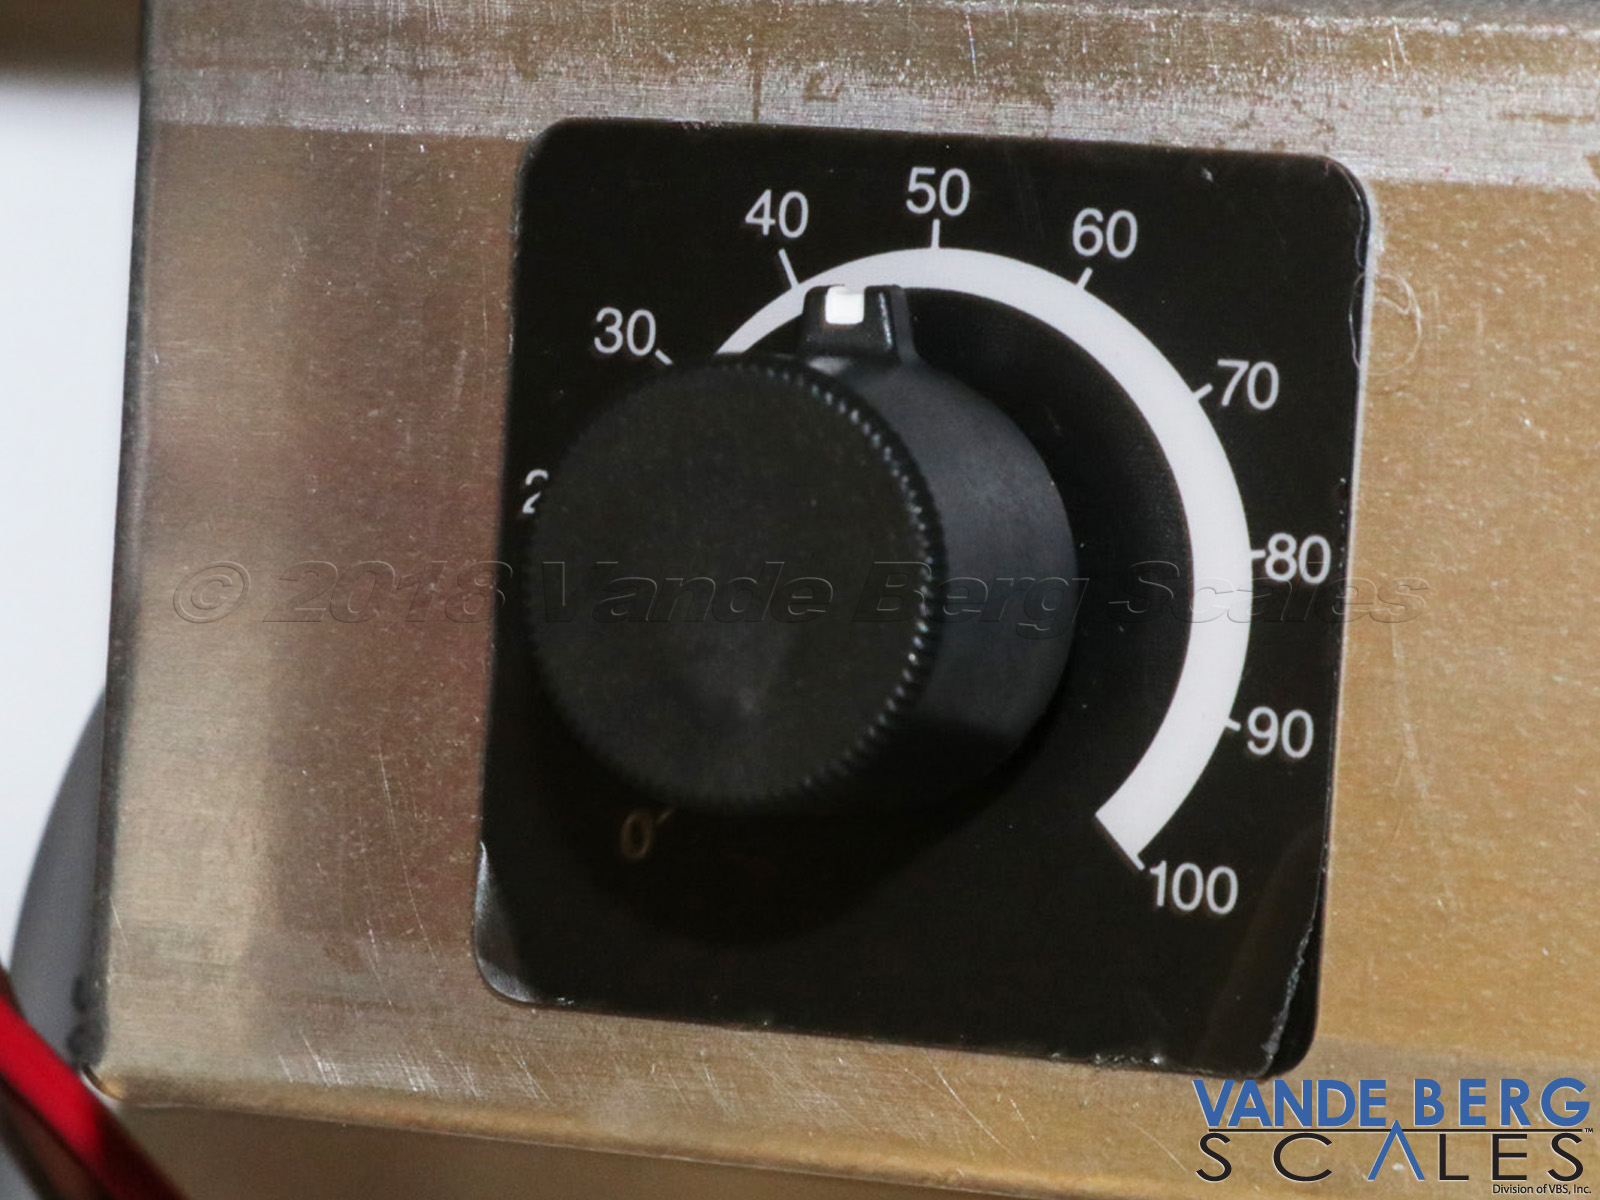 Variable speed control allows the user to quickly adjust the table rotation speed.